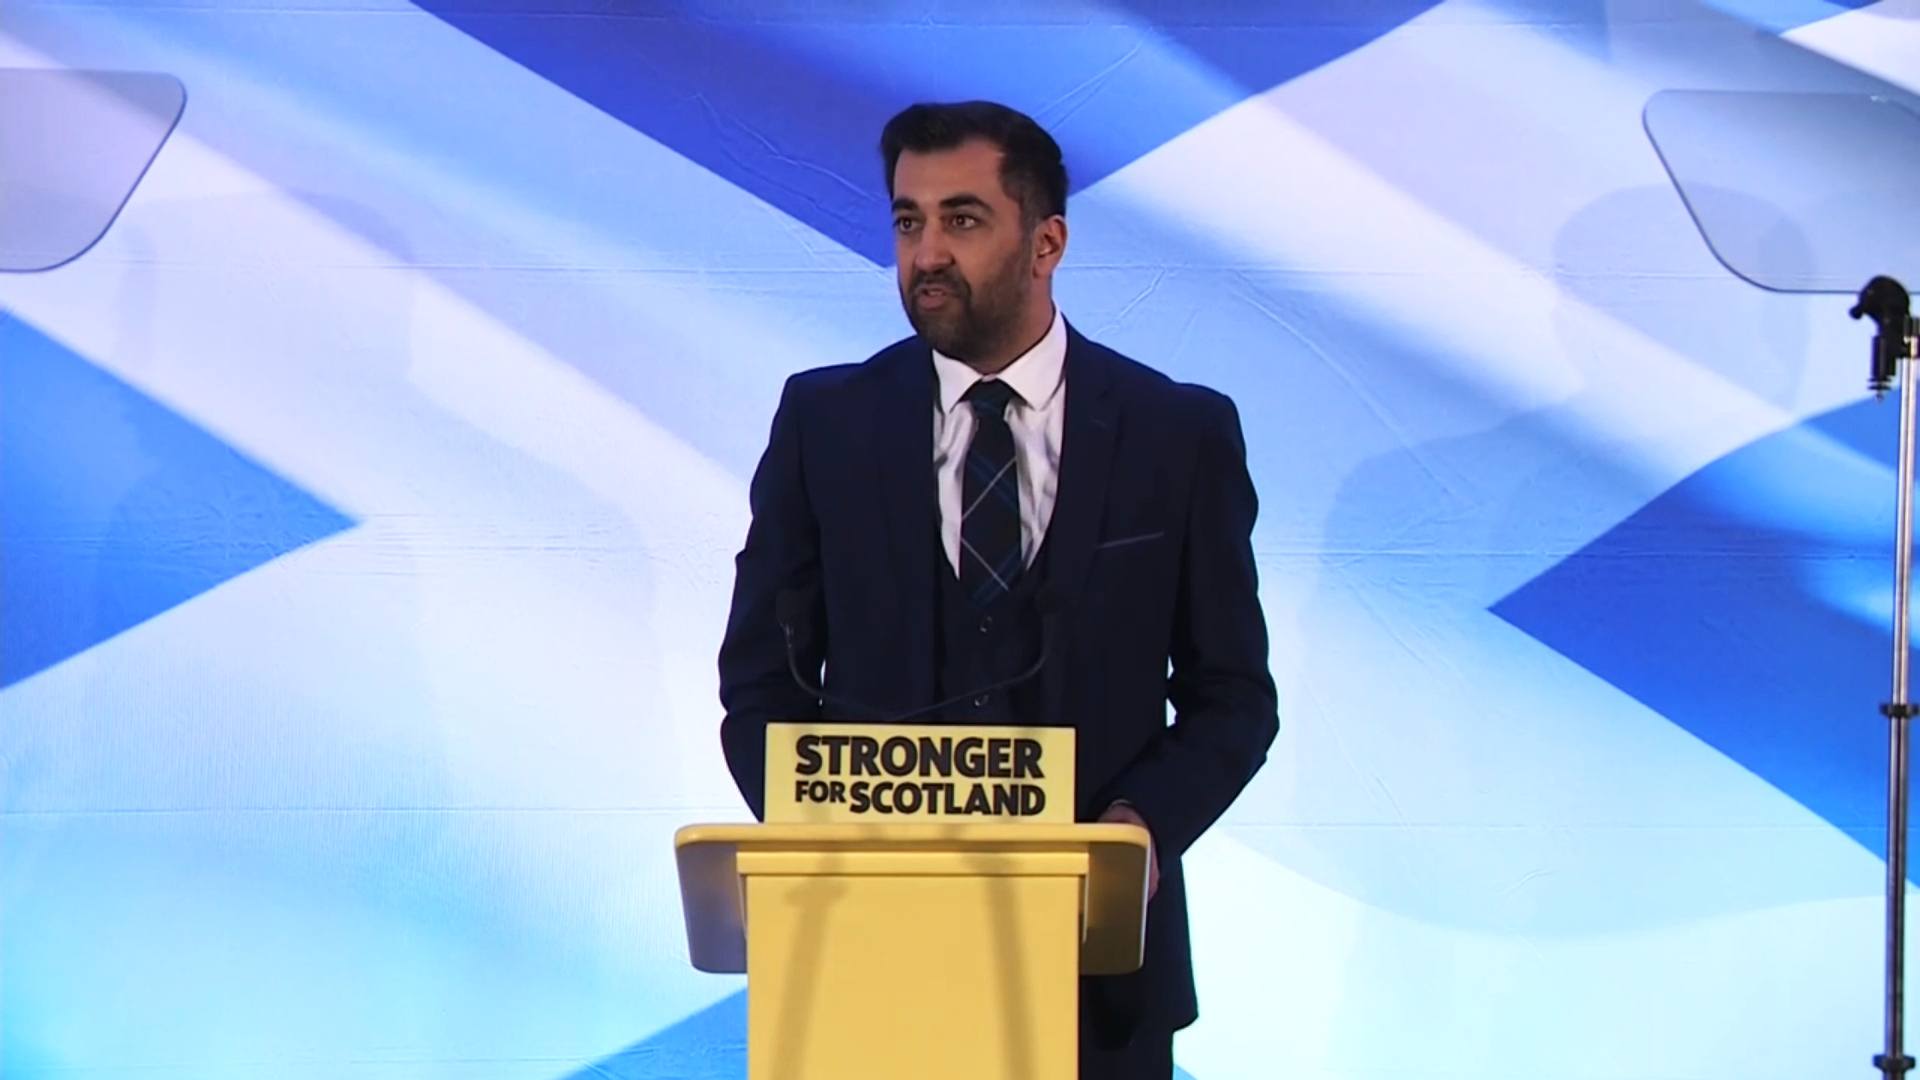 Humza Yousaf is set to be the first Muslim First Minister of Scotland.